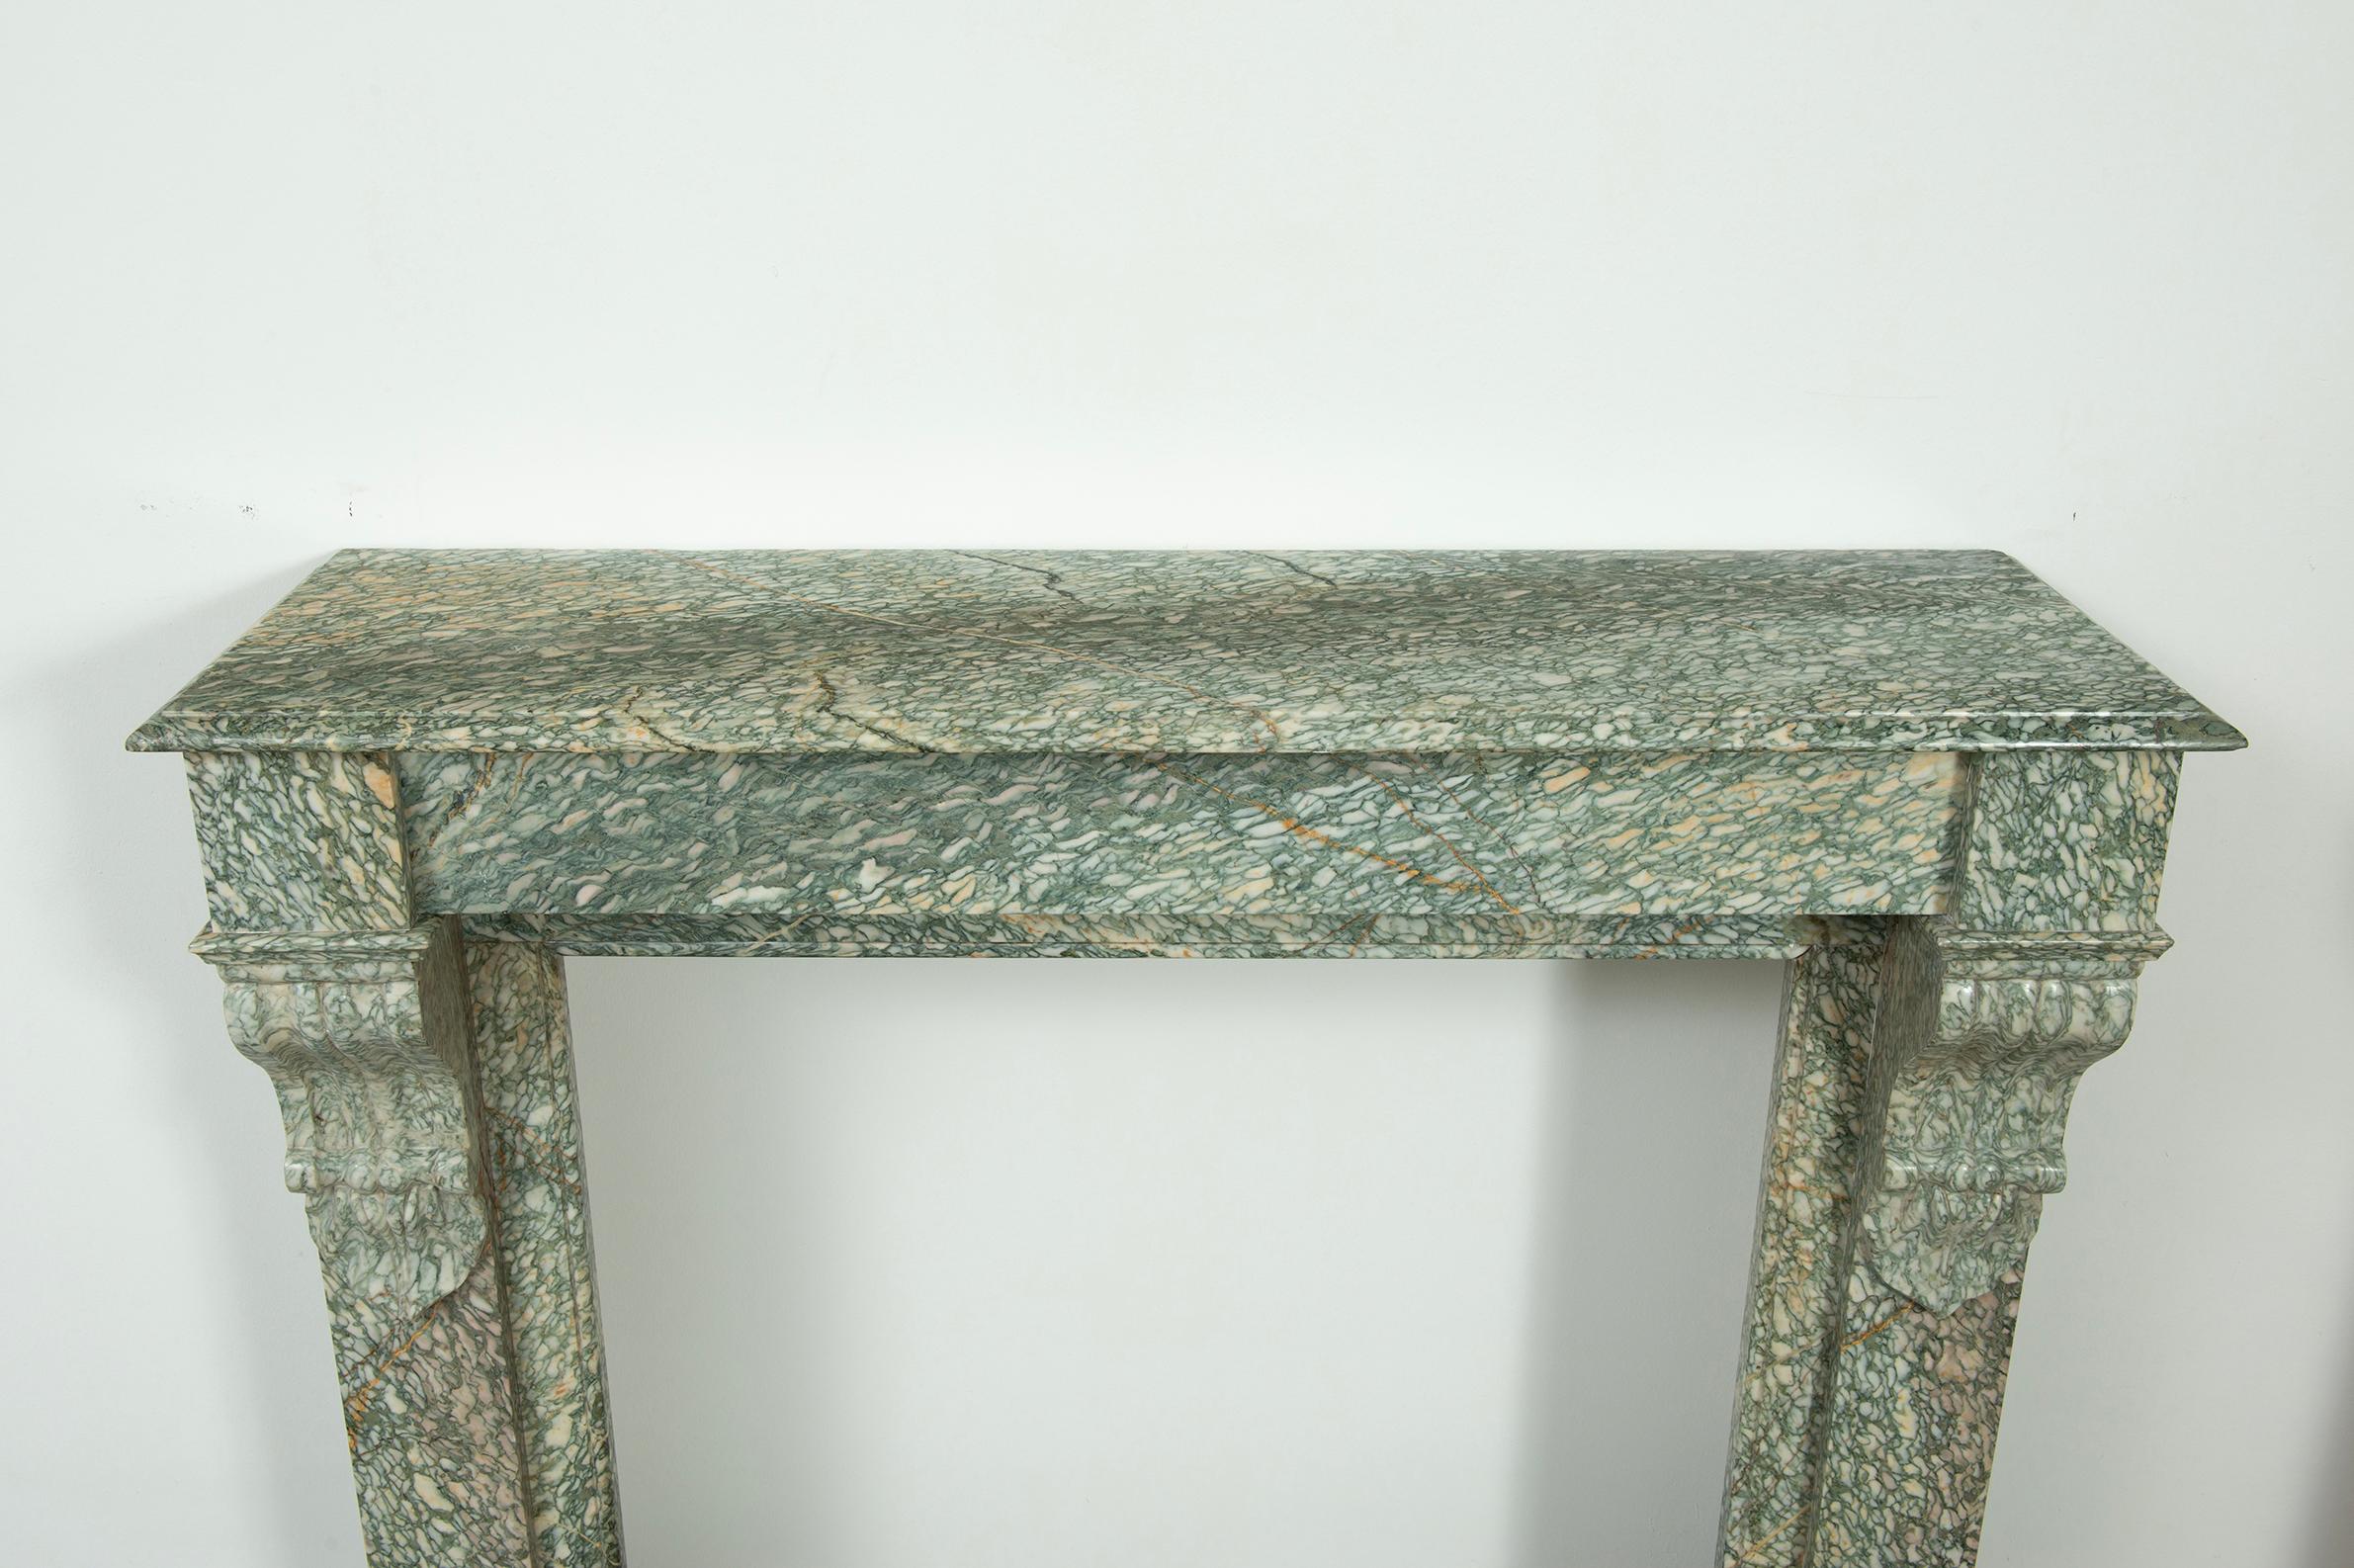 Fireplace Mantel in Vert D'estours Marble In Good Condition For Sale In Haarlem, Noord-Holland